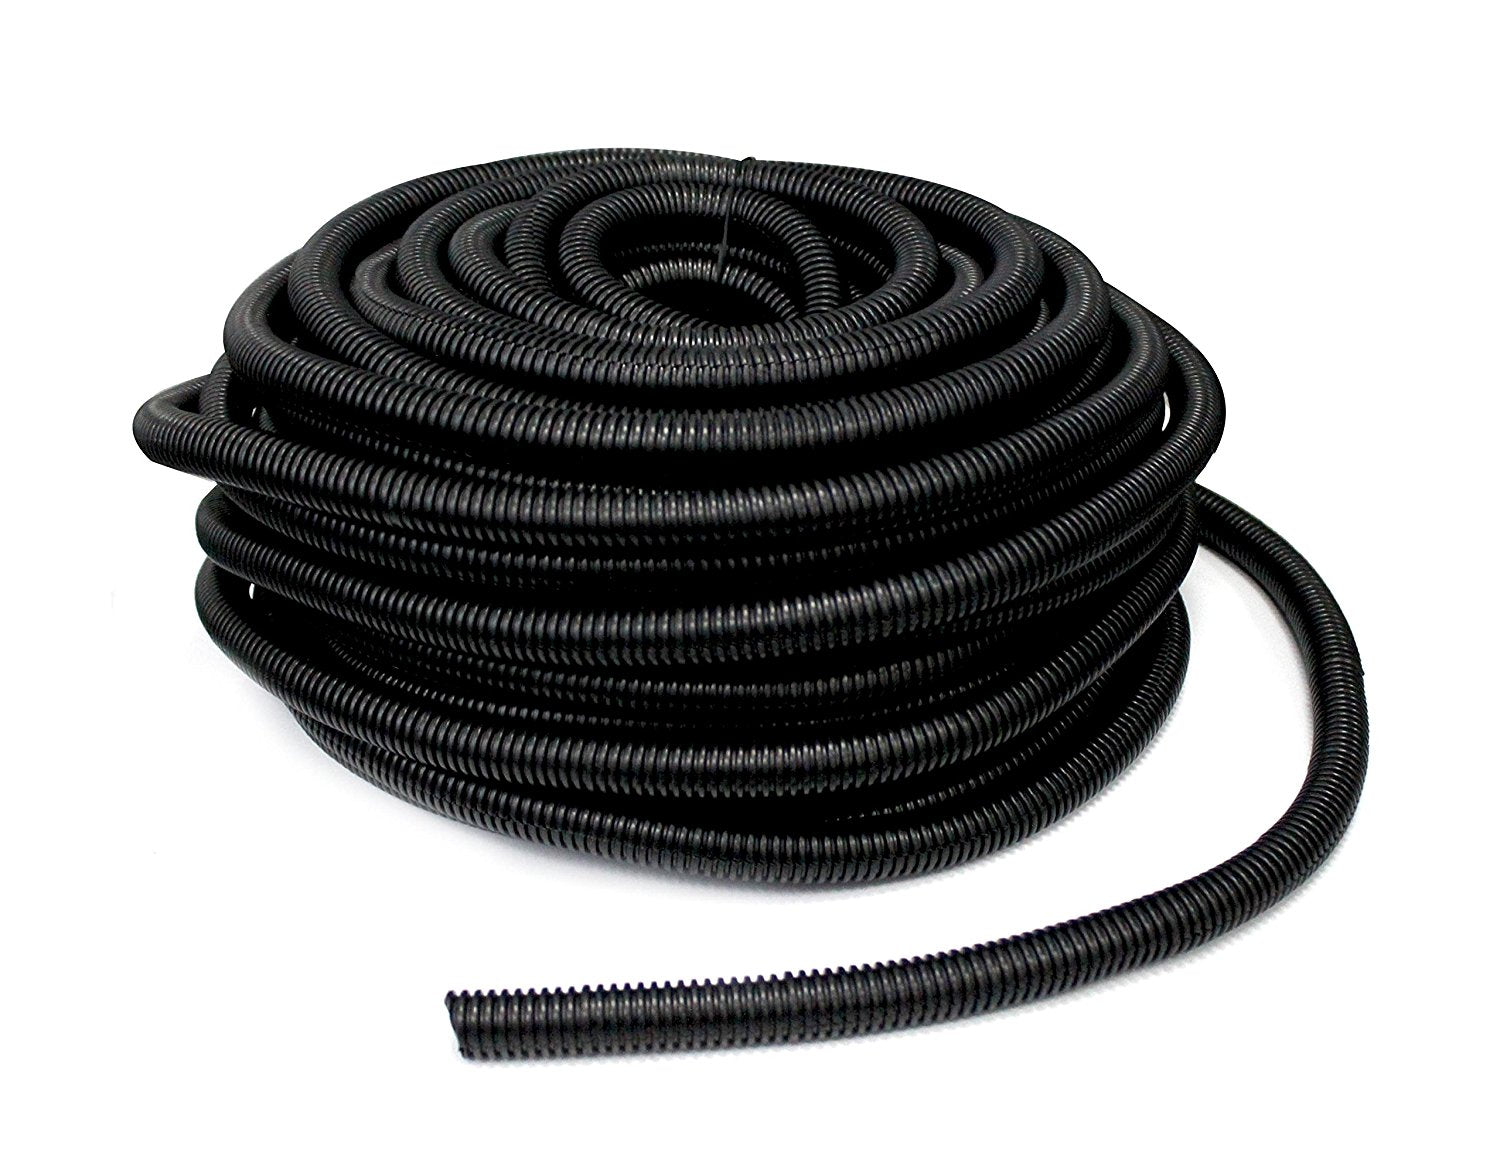 American Terminal 50' Feet 1/4" Black Split Loom Wire Flexible Tubing Wire Cover for Various Automotive, Home, Marine, Industrial Wiring Applications, Etc.